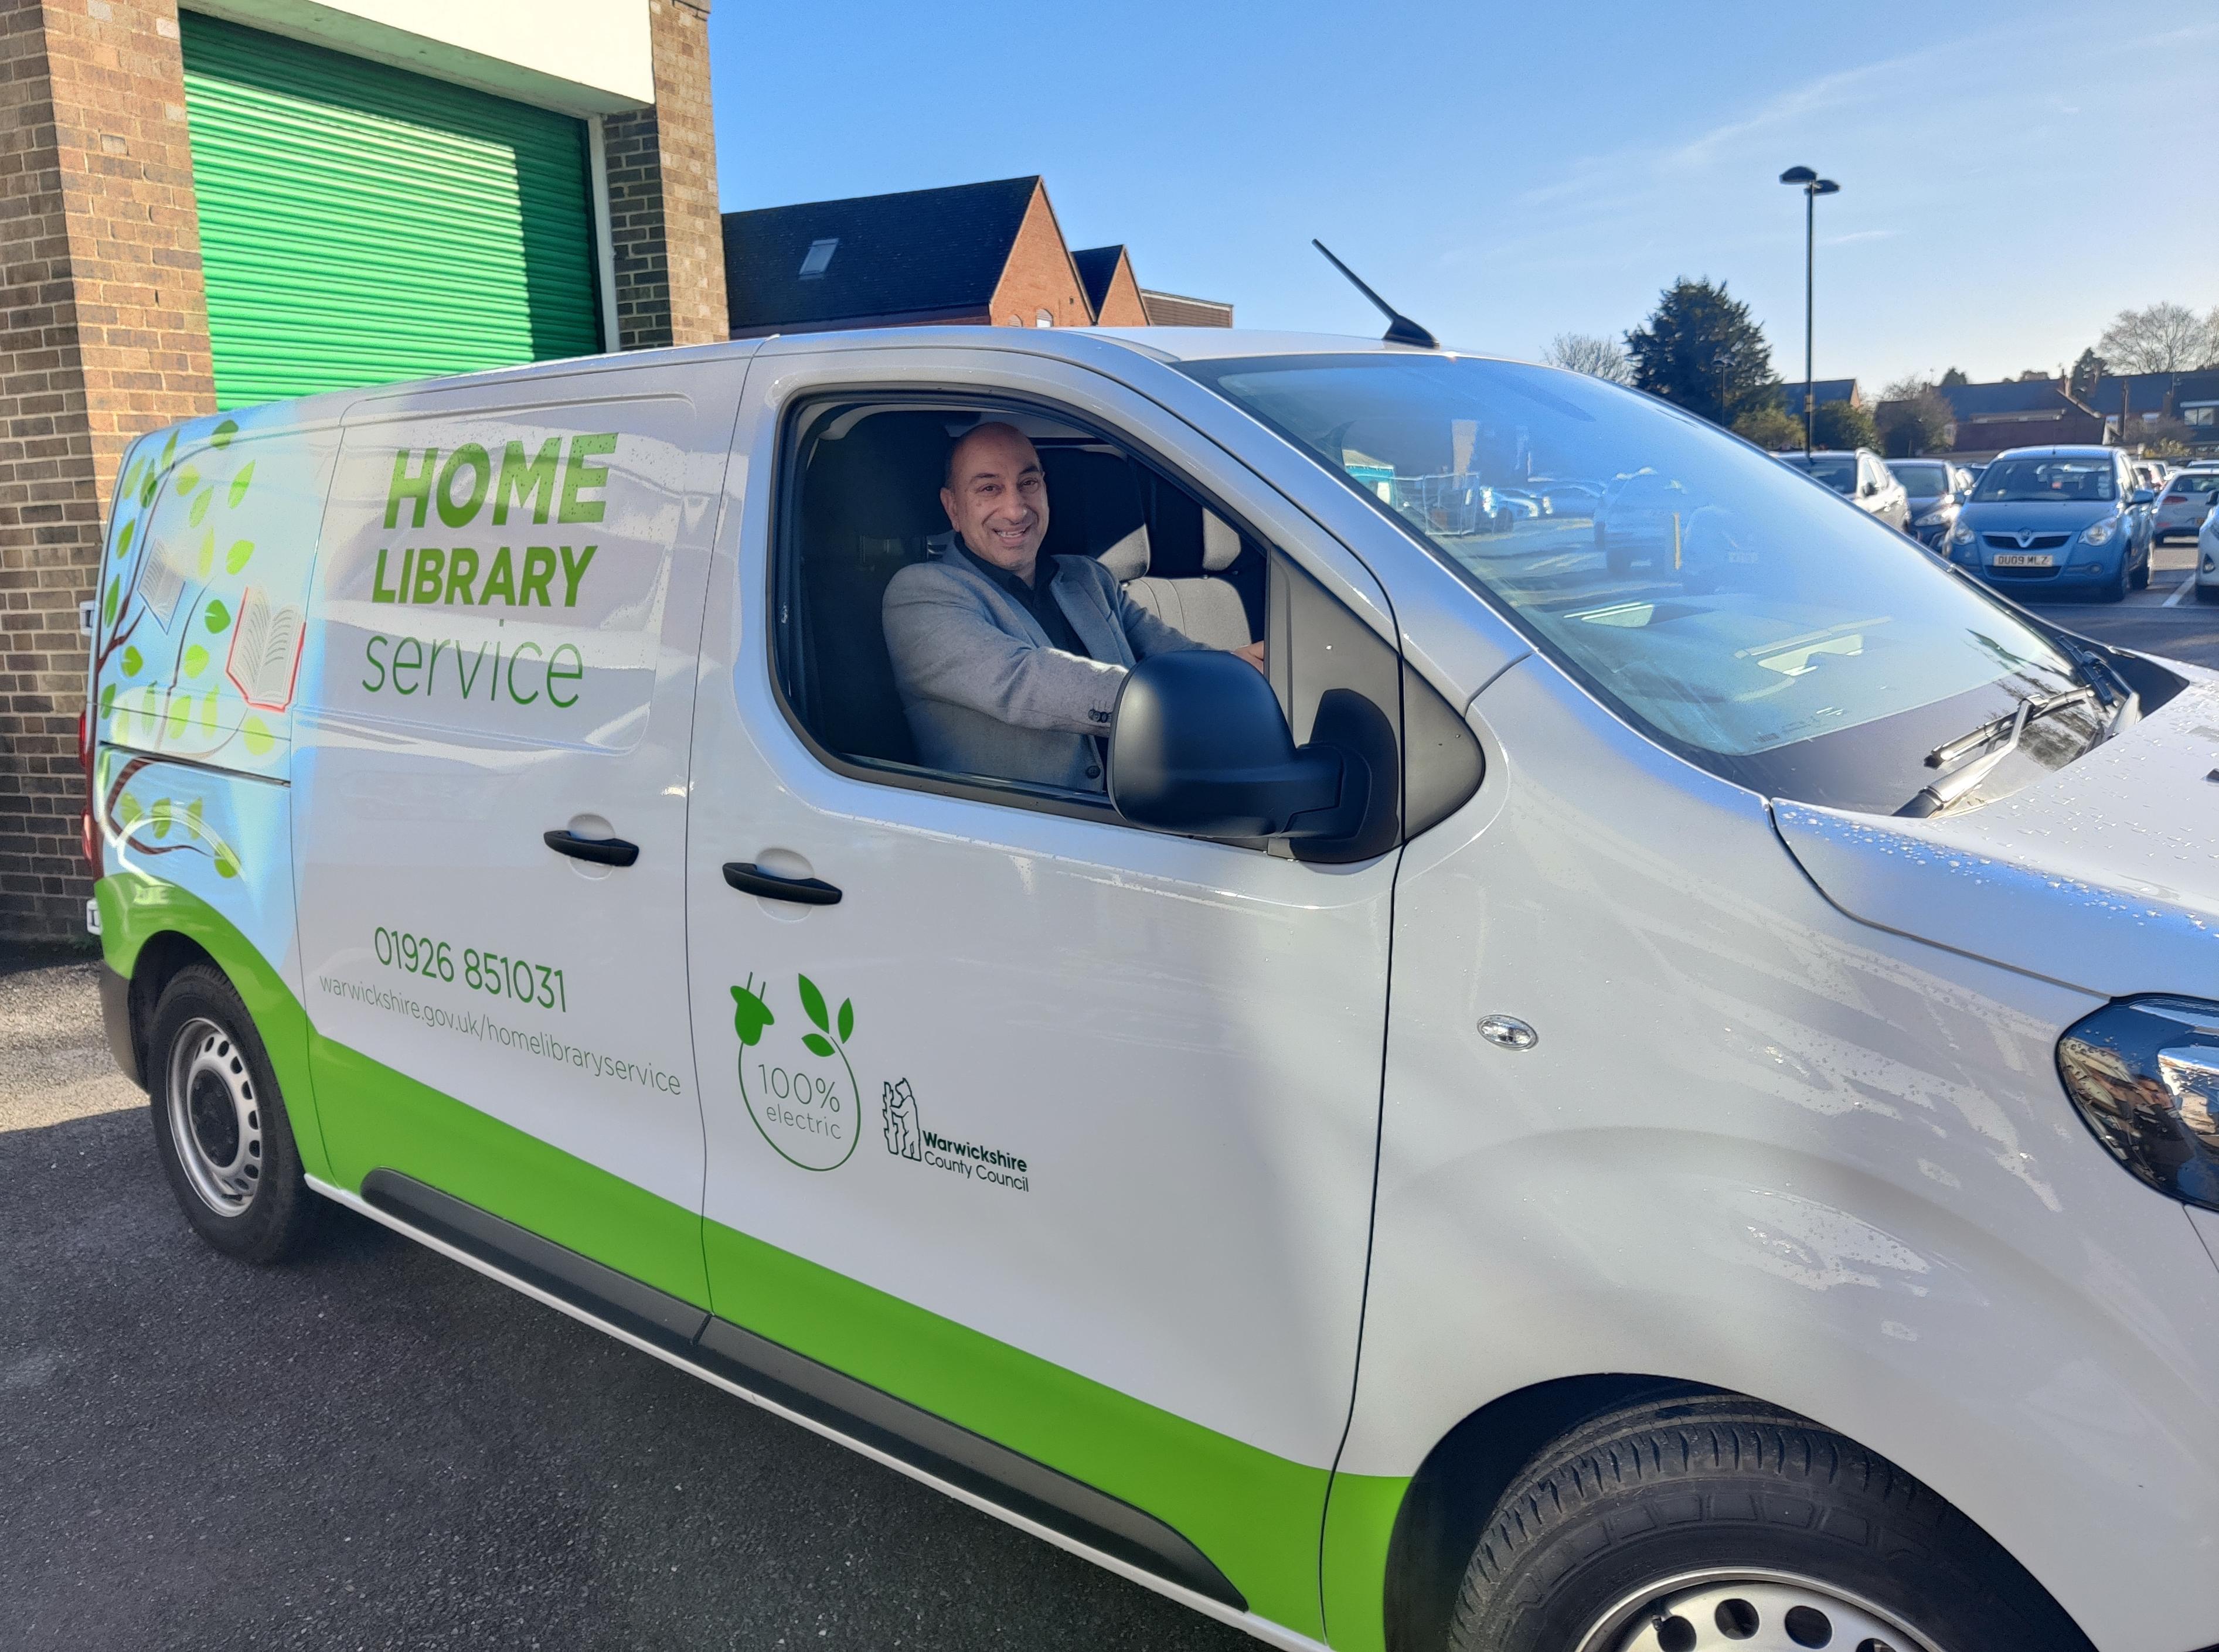 Ayub Khan, Head of Libraries and Face to Face front-line services at Warwickshire County Council, with the new van.